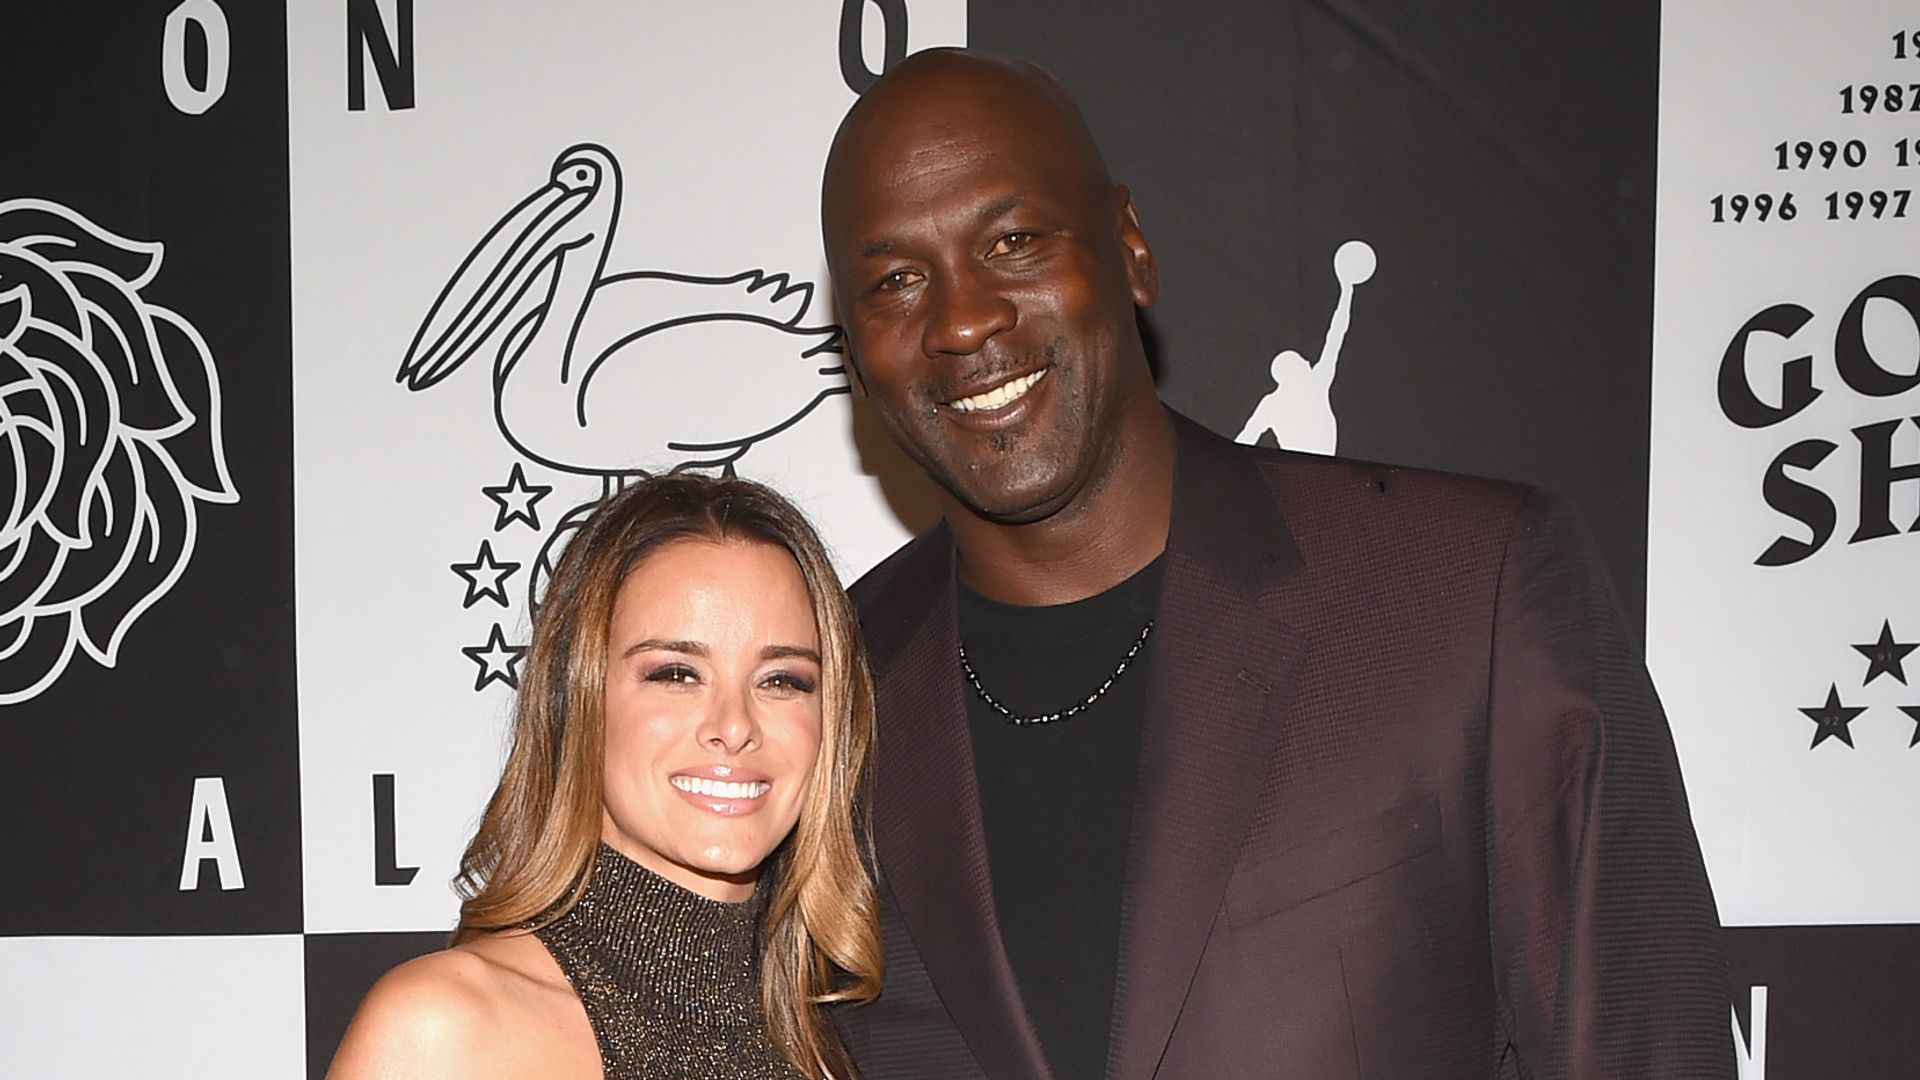 Michael Jordan and Yvette Prieto enjoy Italy with their twins in rare outing [VIDEO]